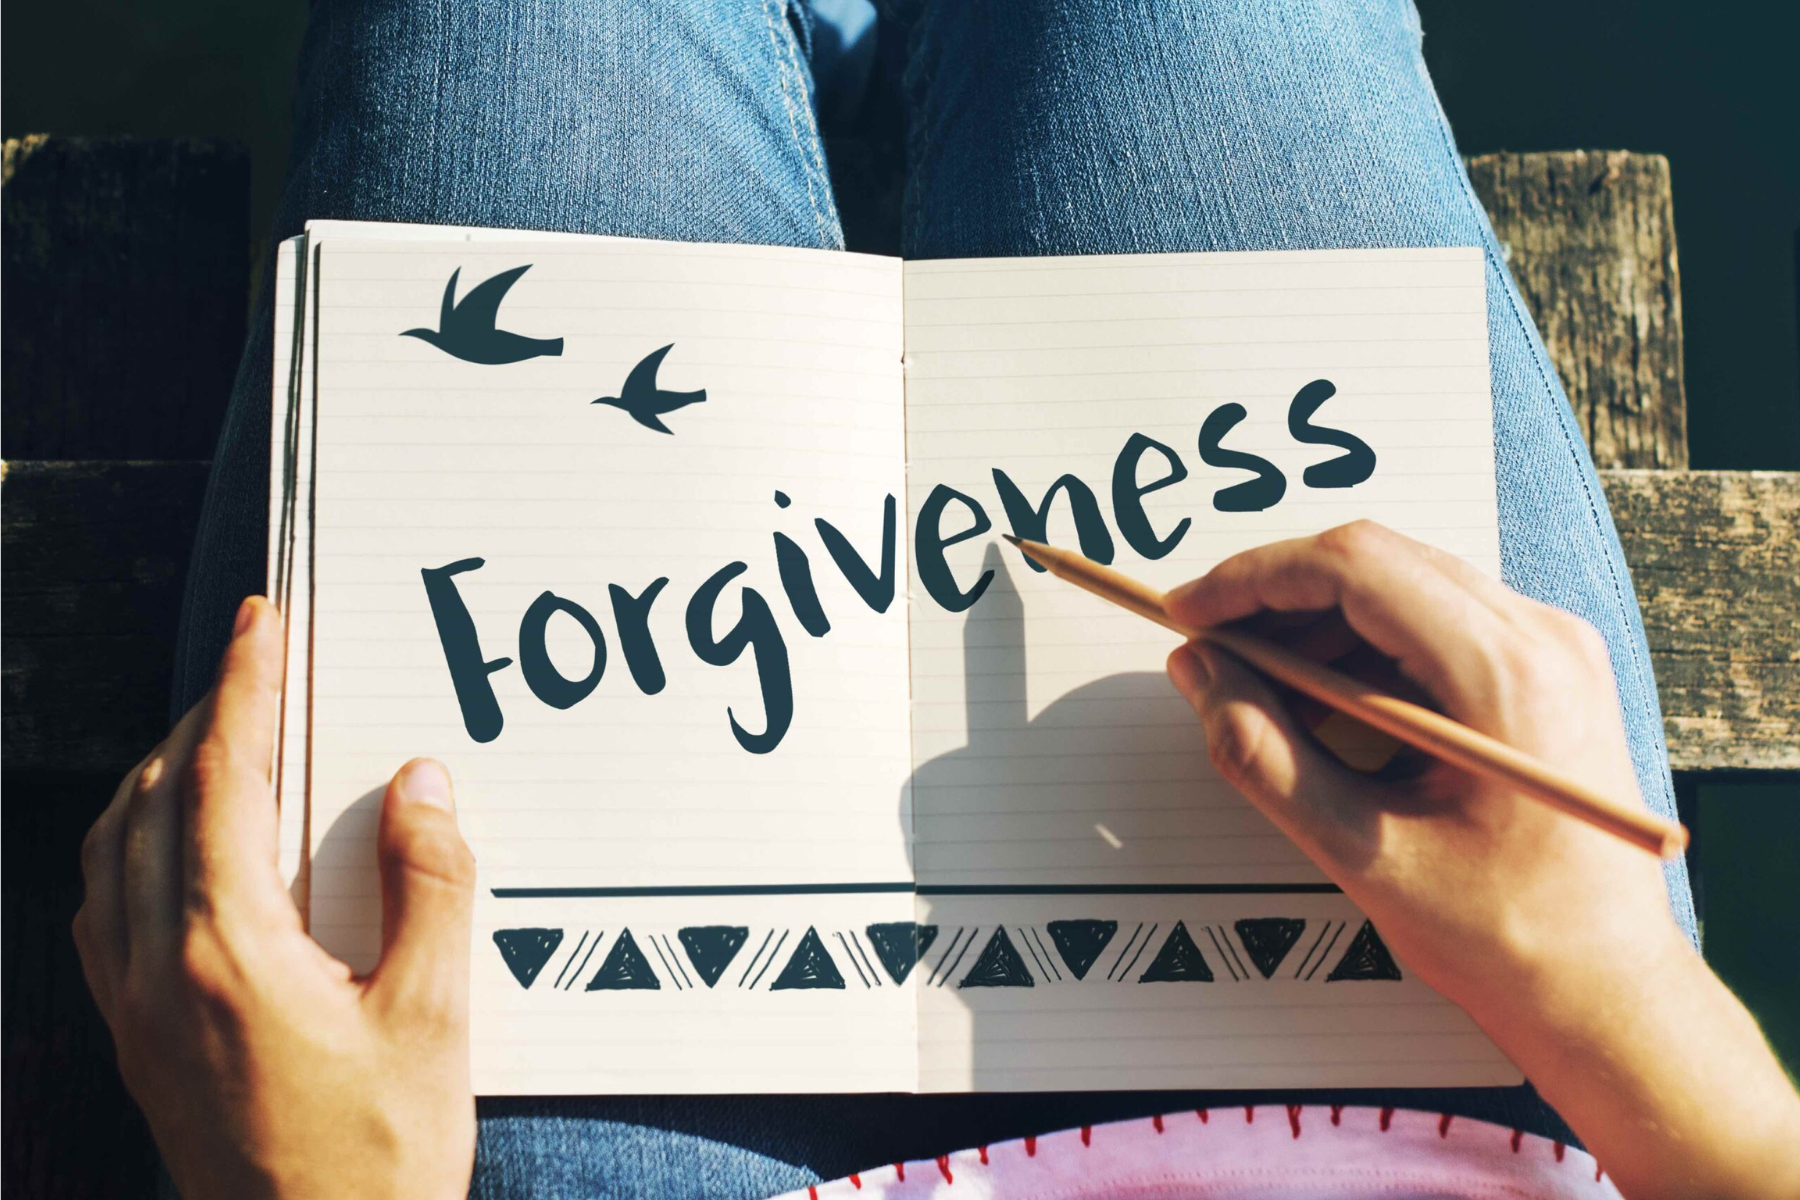 A hand holding a pen writes the word "Forgiveness" on a notebook page